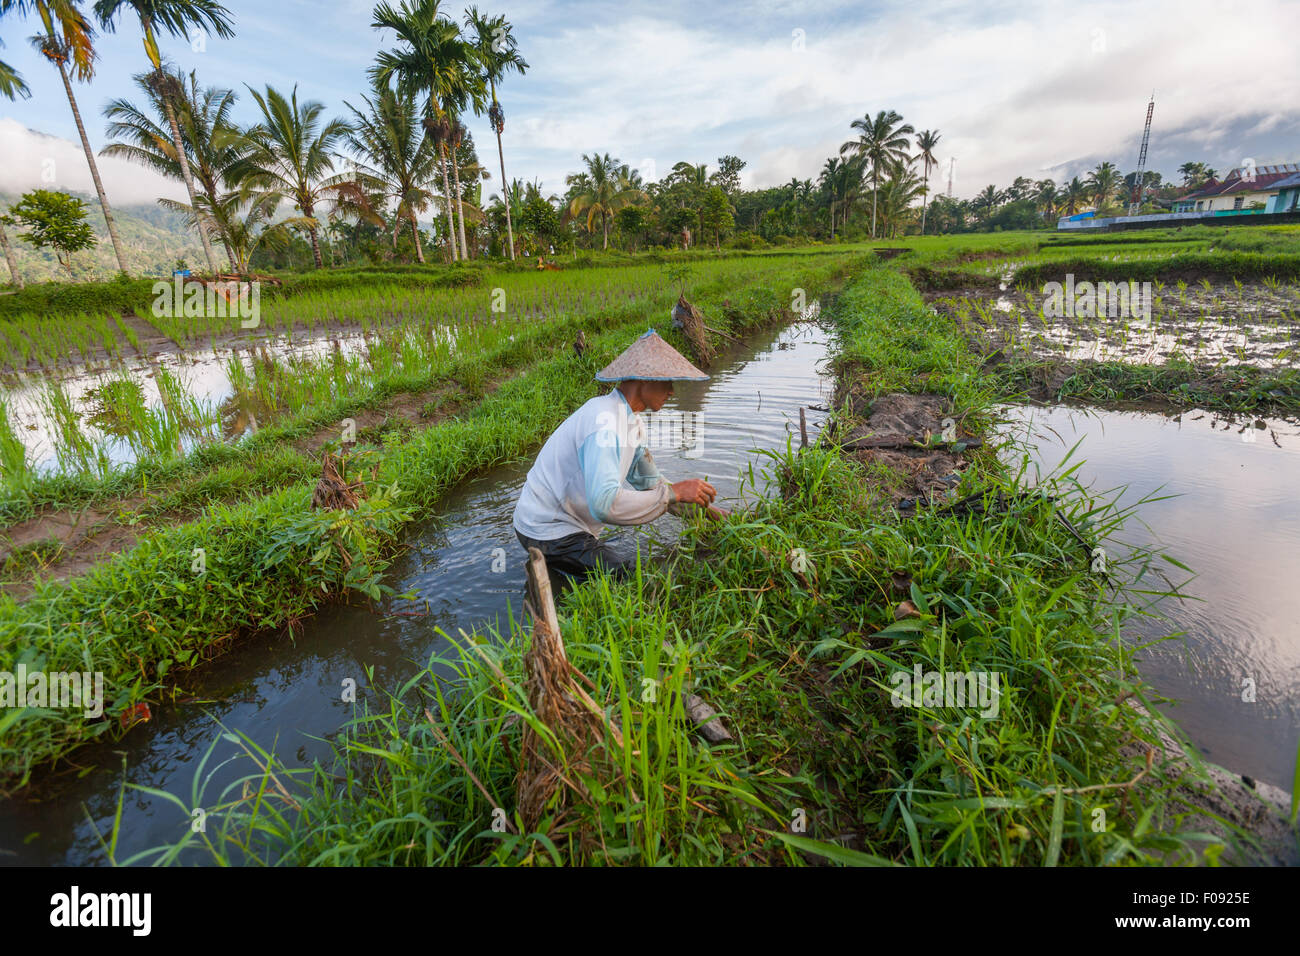 A farmer doing a maintenance work at irrigation canal and embankment at rice field near Lubuk Sikaping, Pasaman, West Sumatra, Indonesia. Stock Photo